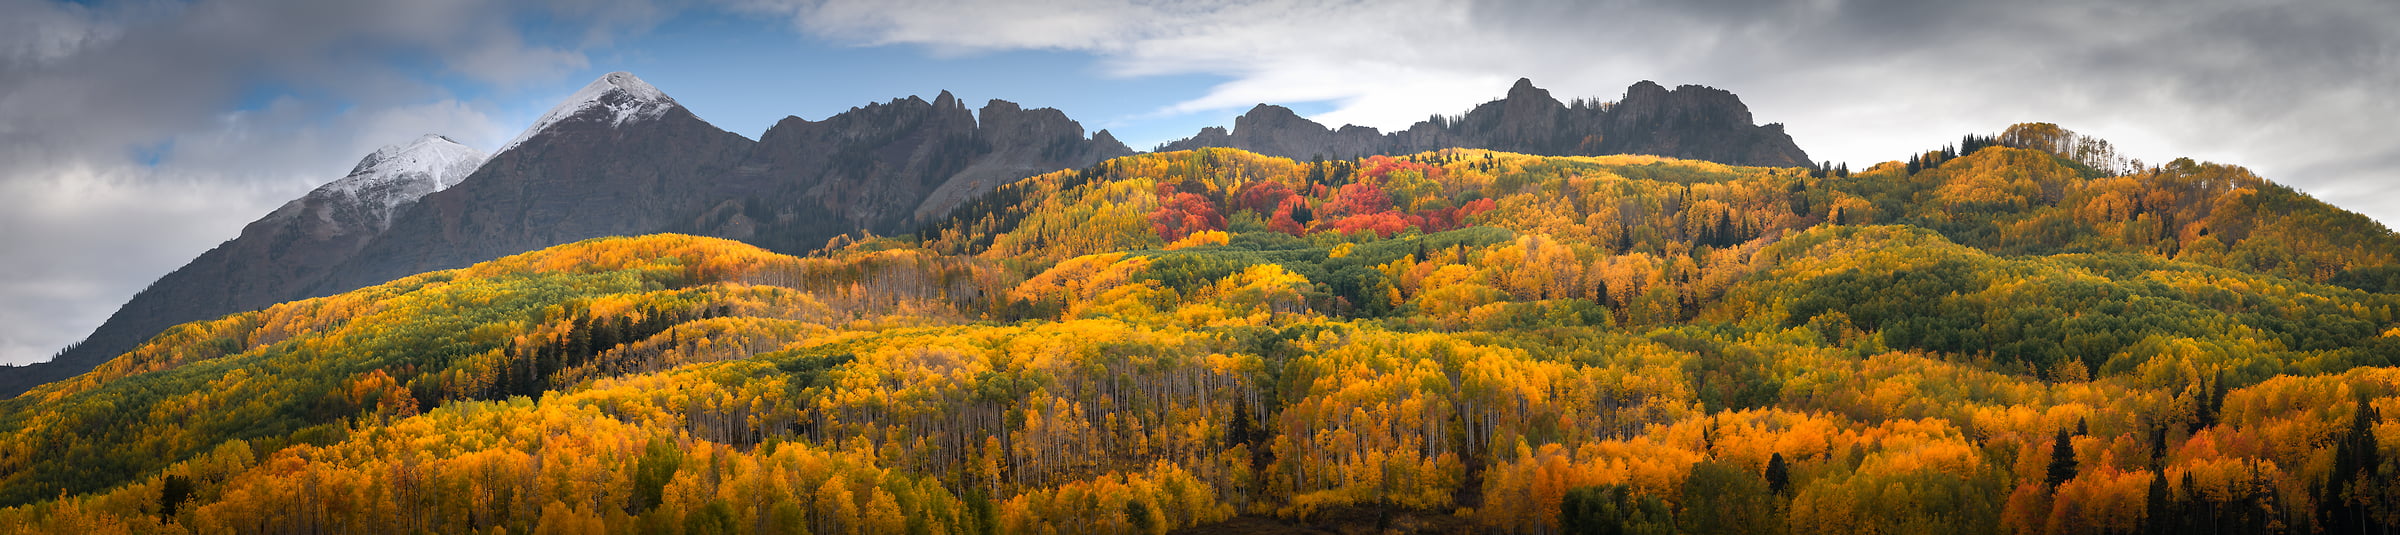 469 megapixels! A very high resolution, wallpaper photo of a Colorado landscape with autumn trees in the foreground and mountains in the background; photograph created by Jeff Lewis in Crested Butte, Colorado